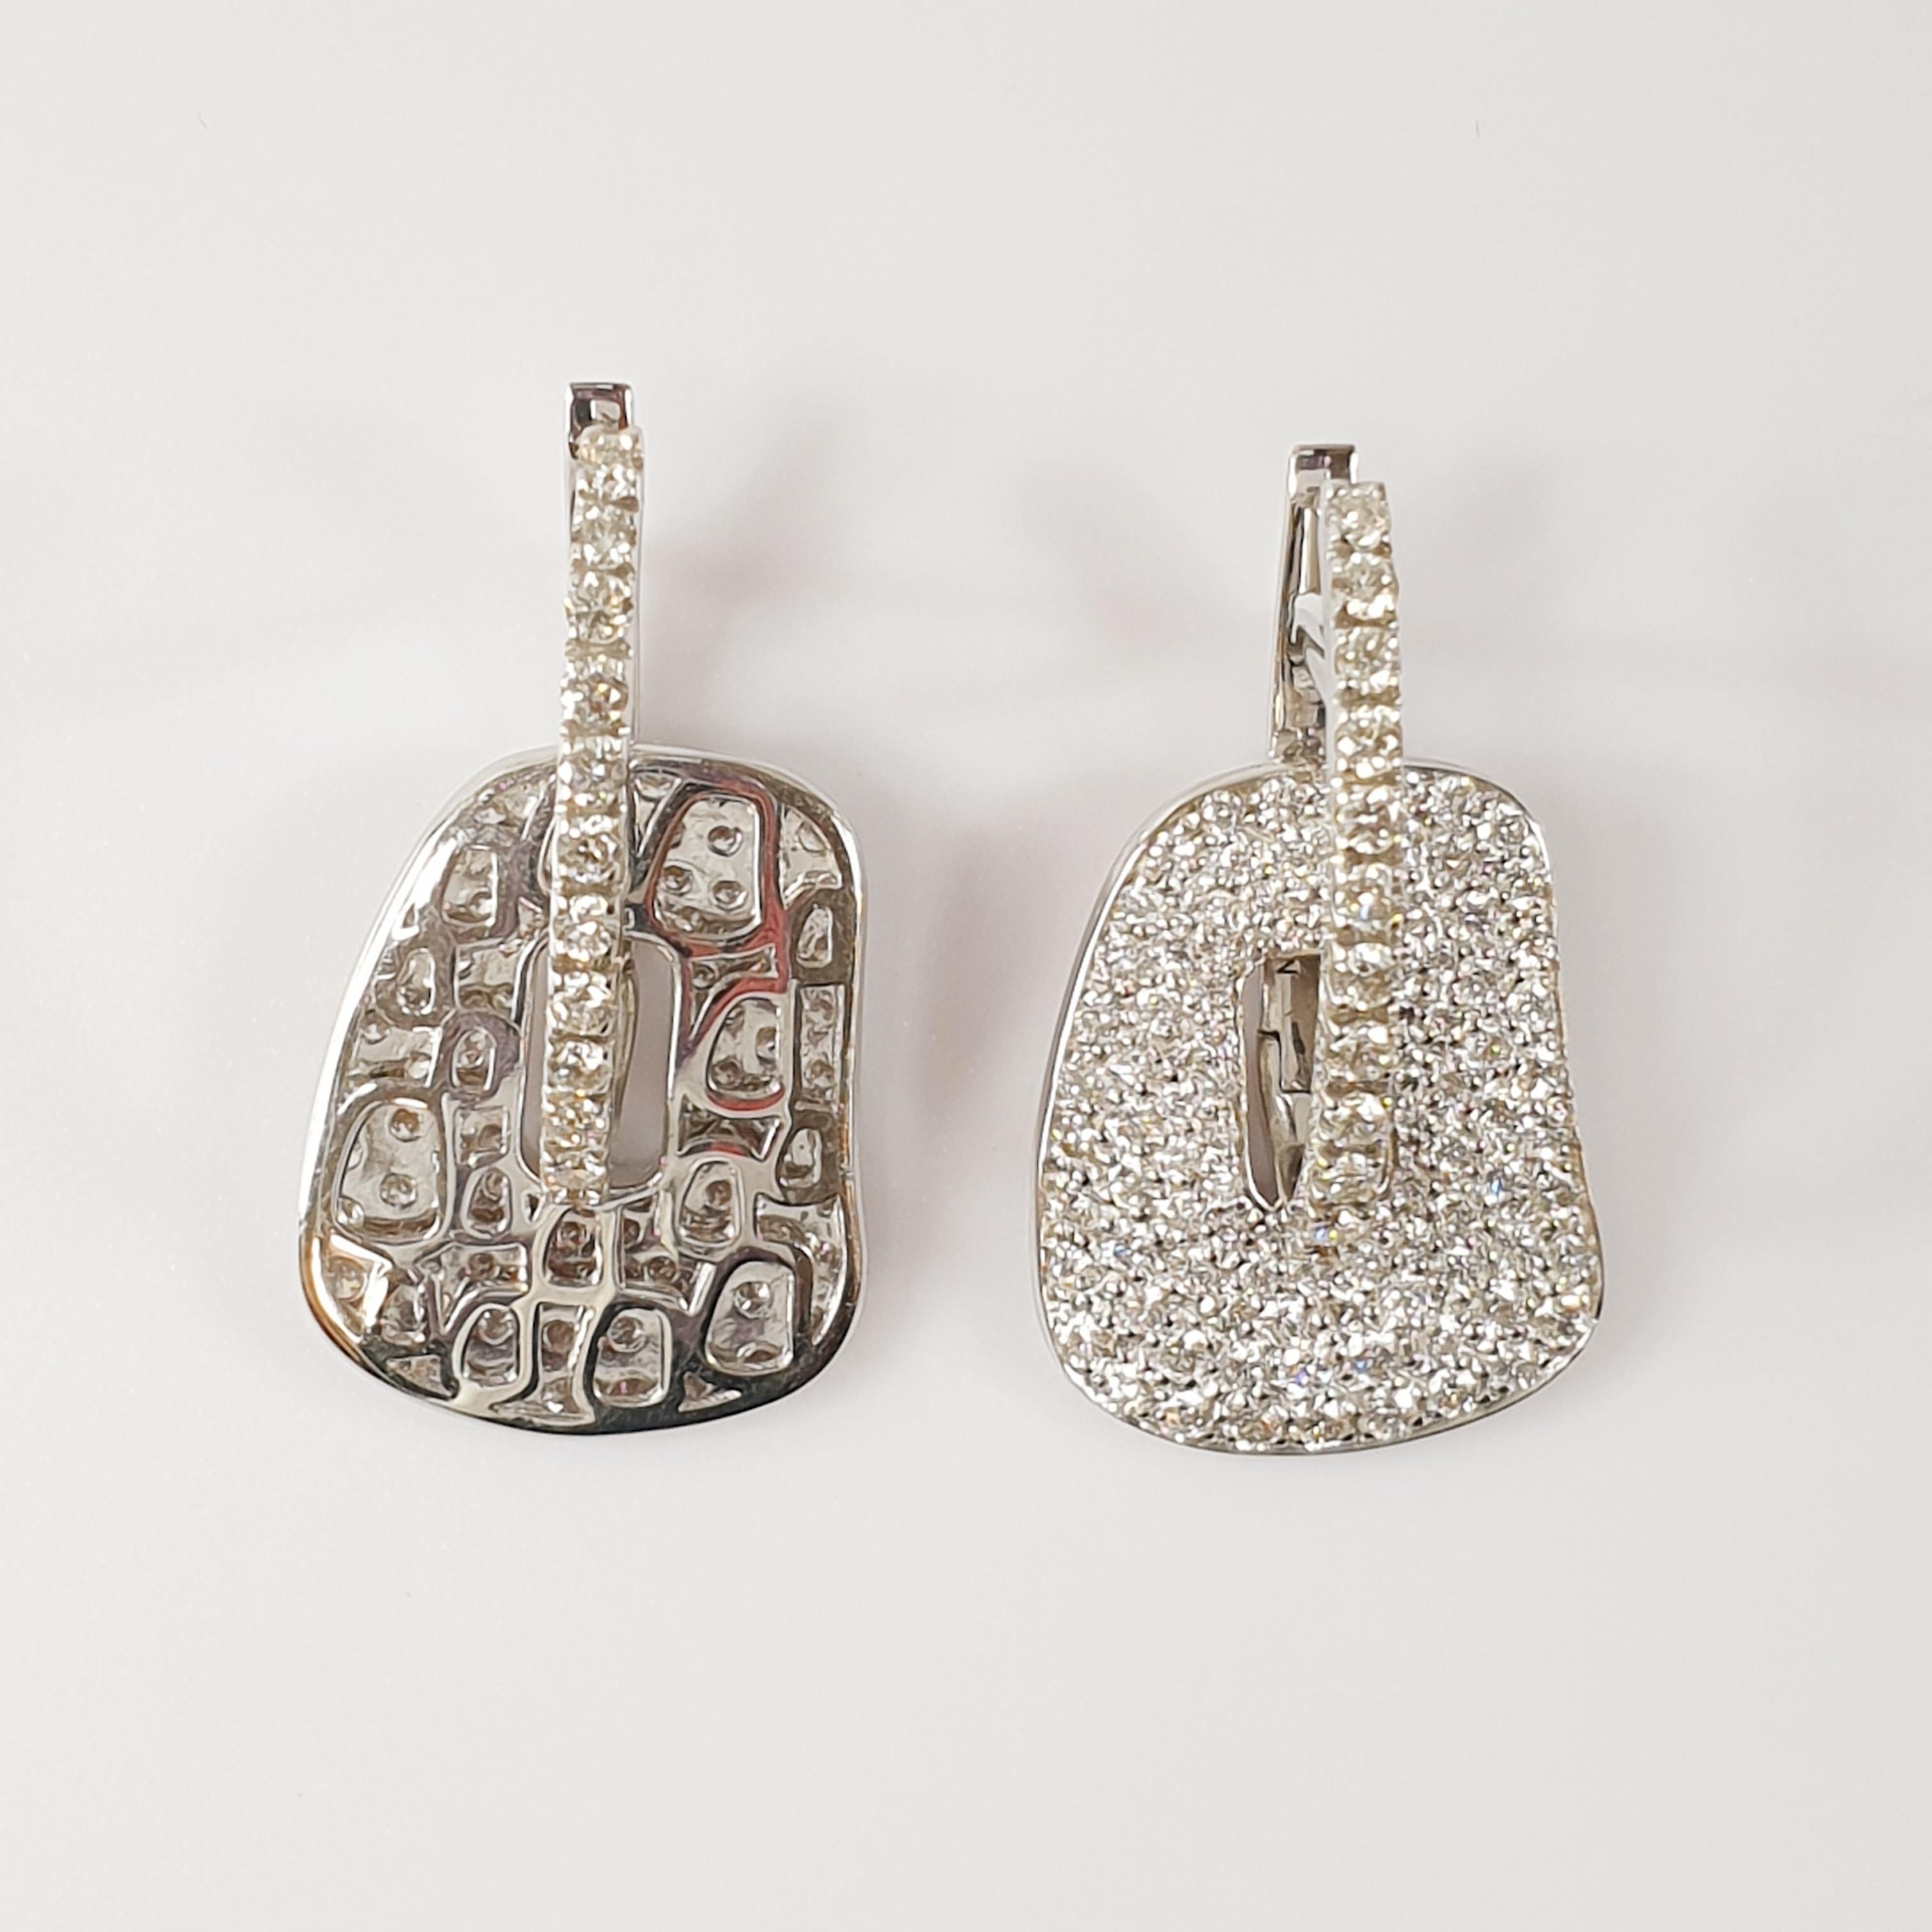 Mattioli Puzzle Collection 18k White Gold Pavé of Diamonds Earrings 
with two pairs of coloured puzzles to your choice 
Diamonds carat 1,78 ct
Weight 8,00gr 
Measure 20mm or 0.75 inches
Puzzle pendants of mother of pearl you can choose between 25